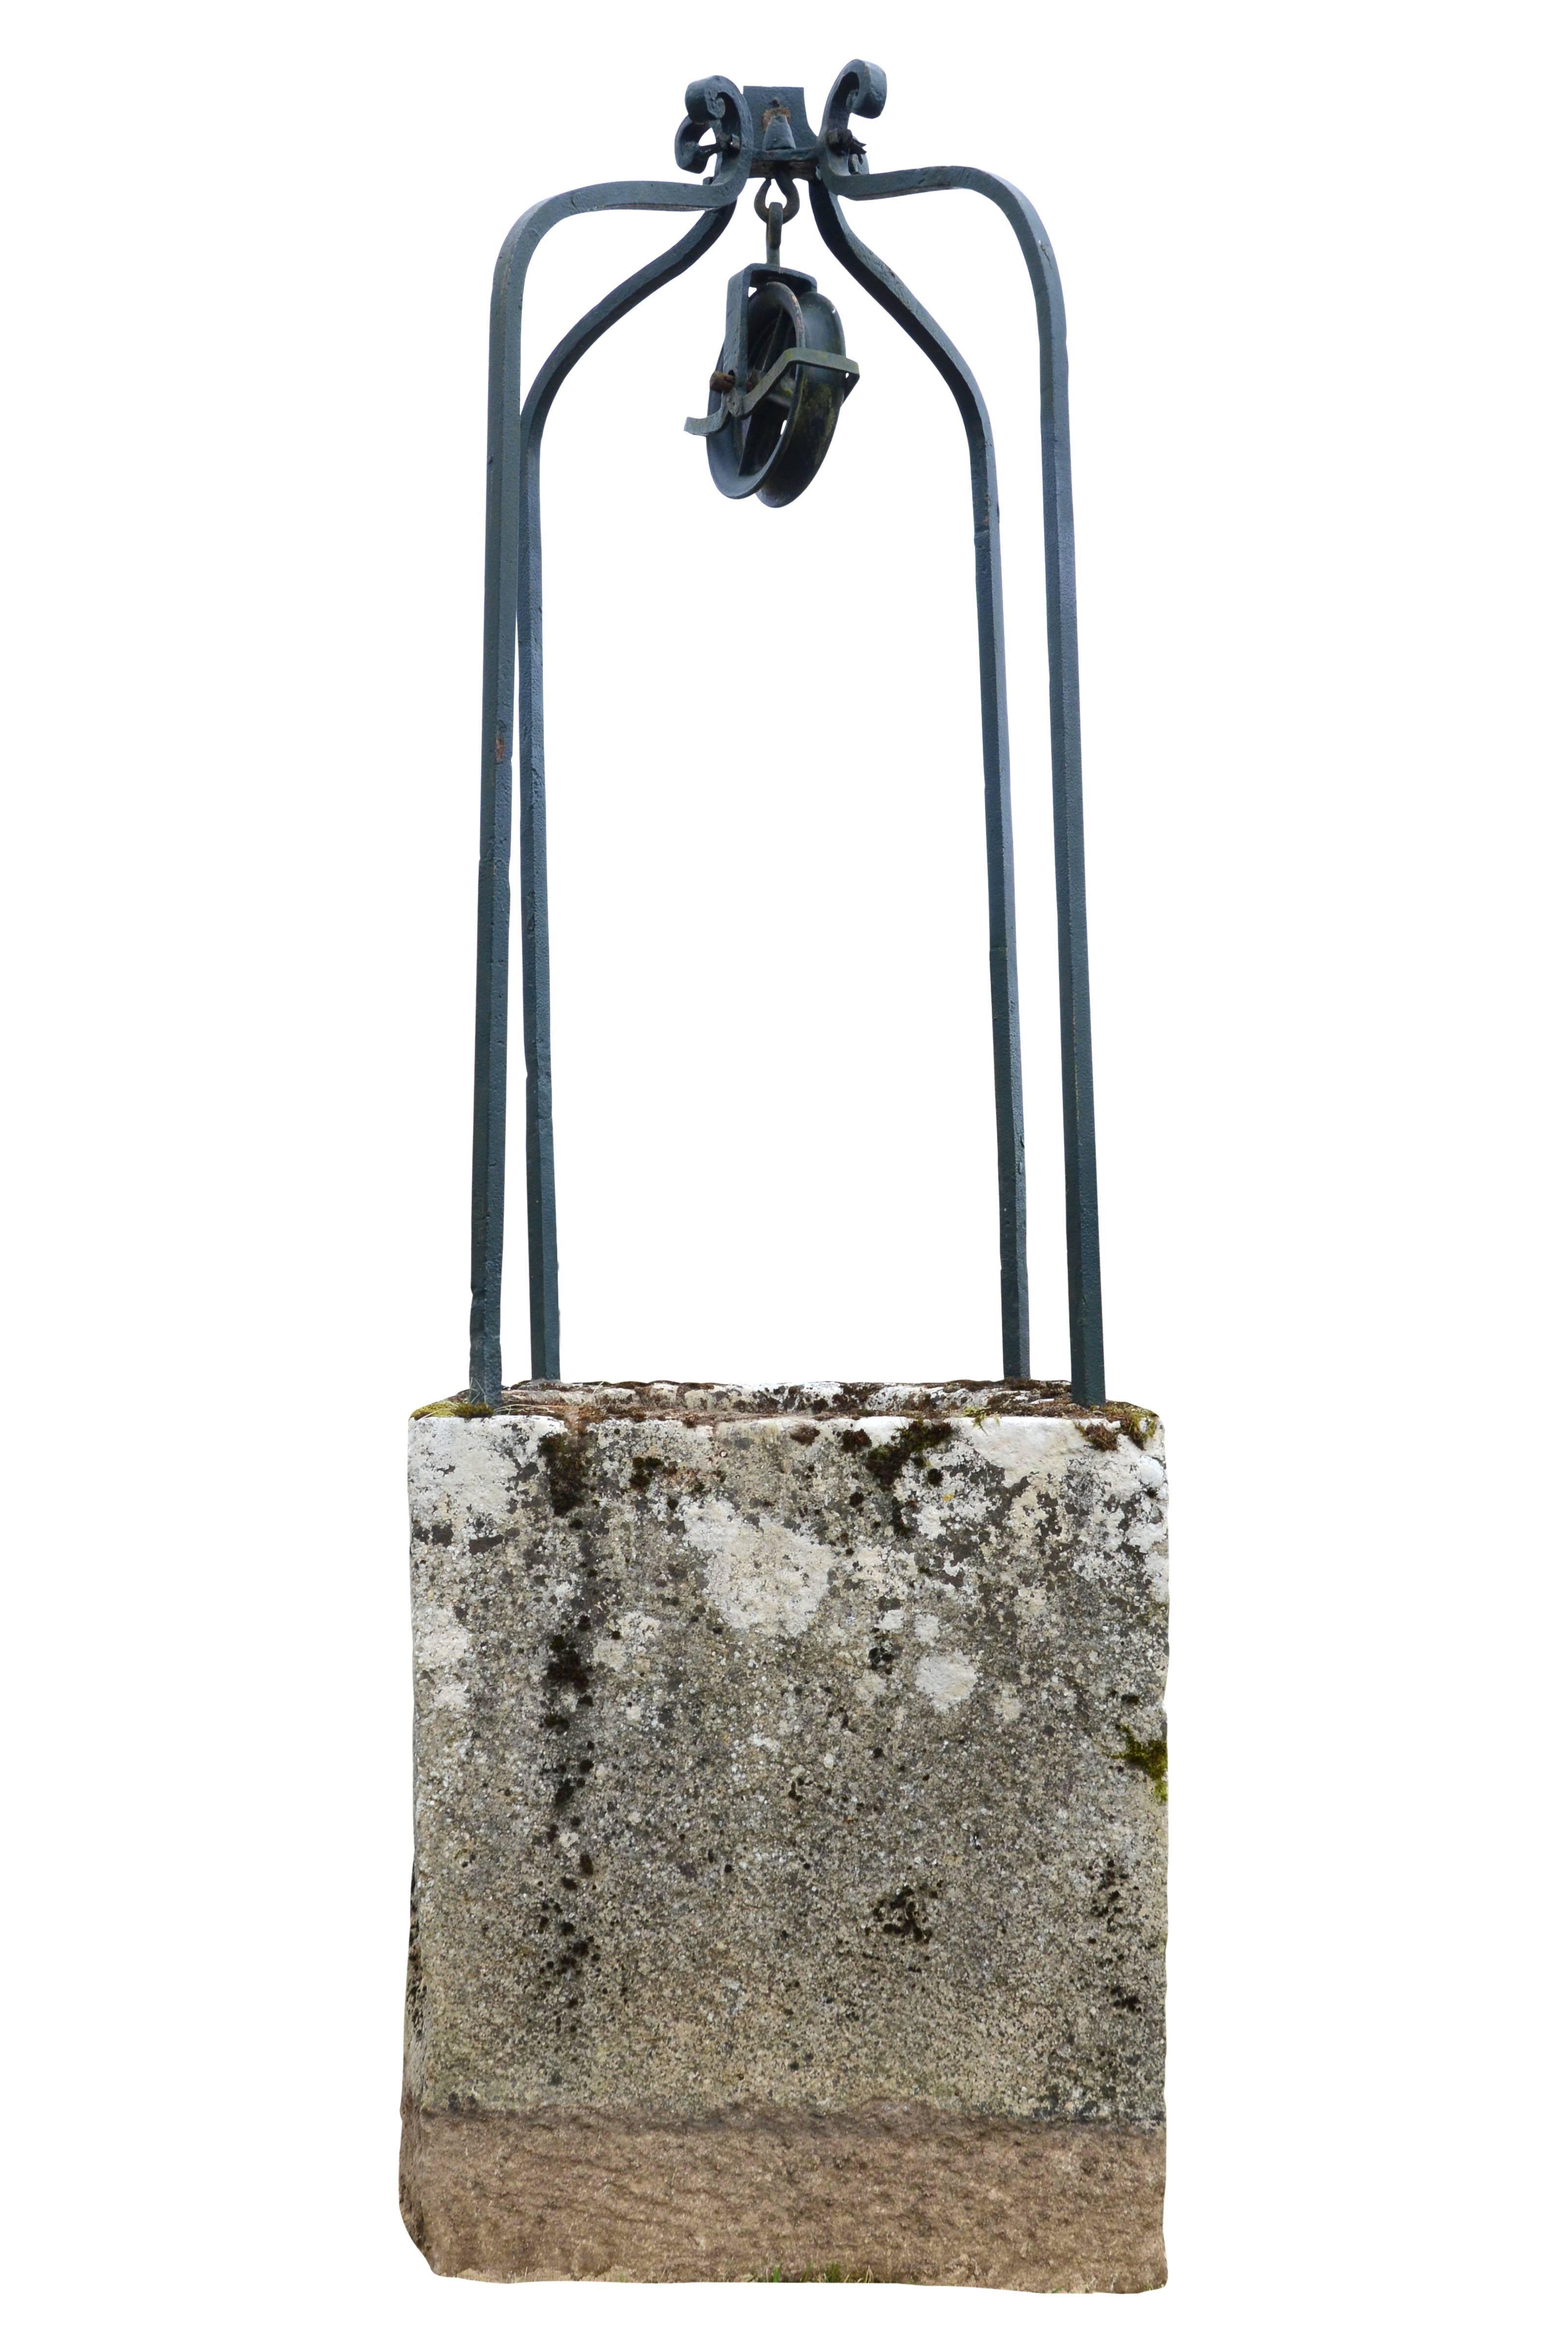 Dated from the late 18th century, stone square well curbstone and its ironwork with pulley decorated with windings at the ends. Dimensions: Total height with the stone wall: 100.3 in. ; stone well curbstone height: 37.4 in. ; wrought iron element